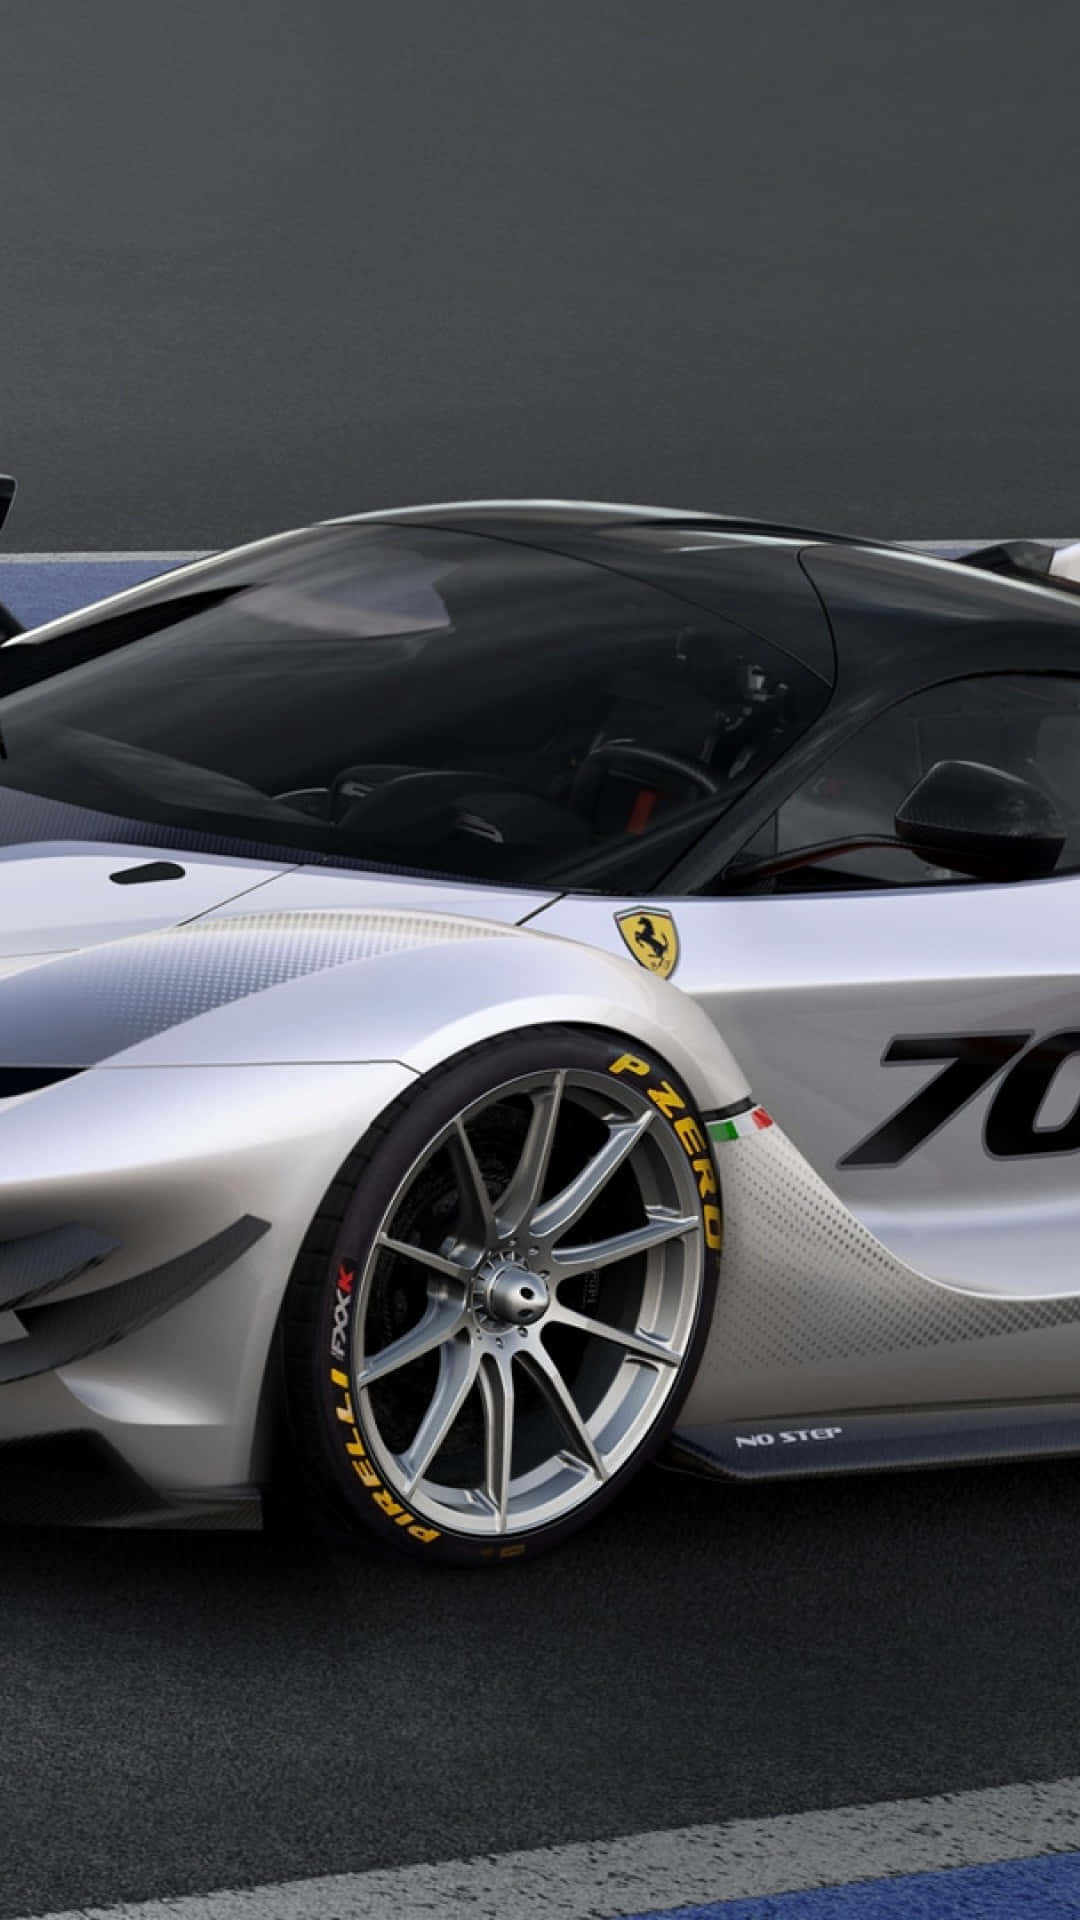 The Ferrari F12tr Concept Is Shown In This Image Wallpaper